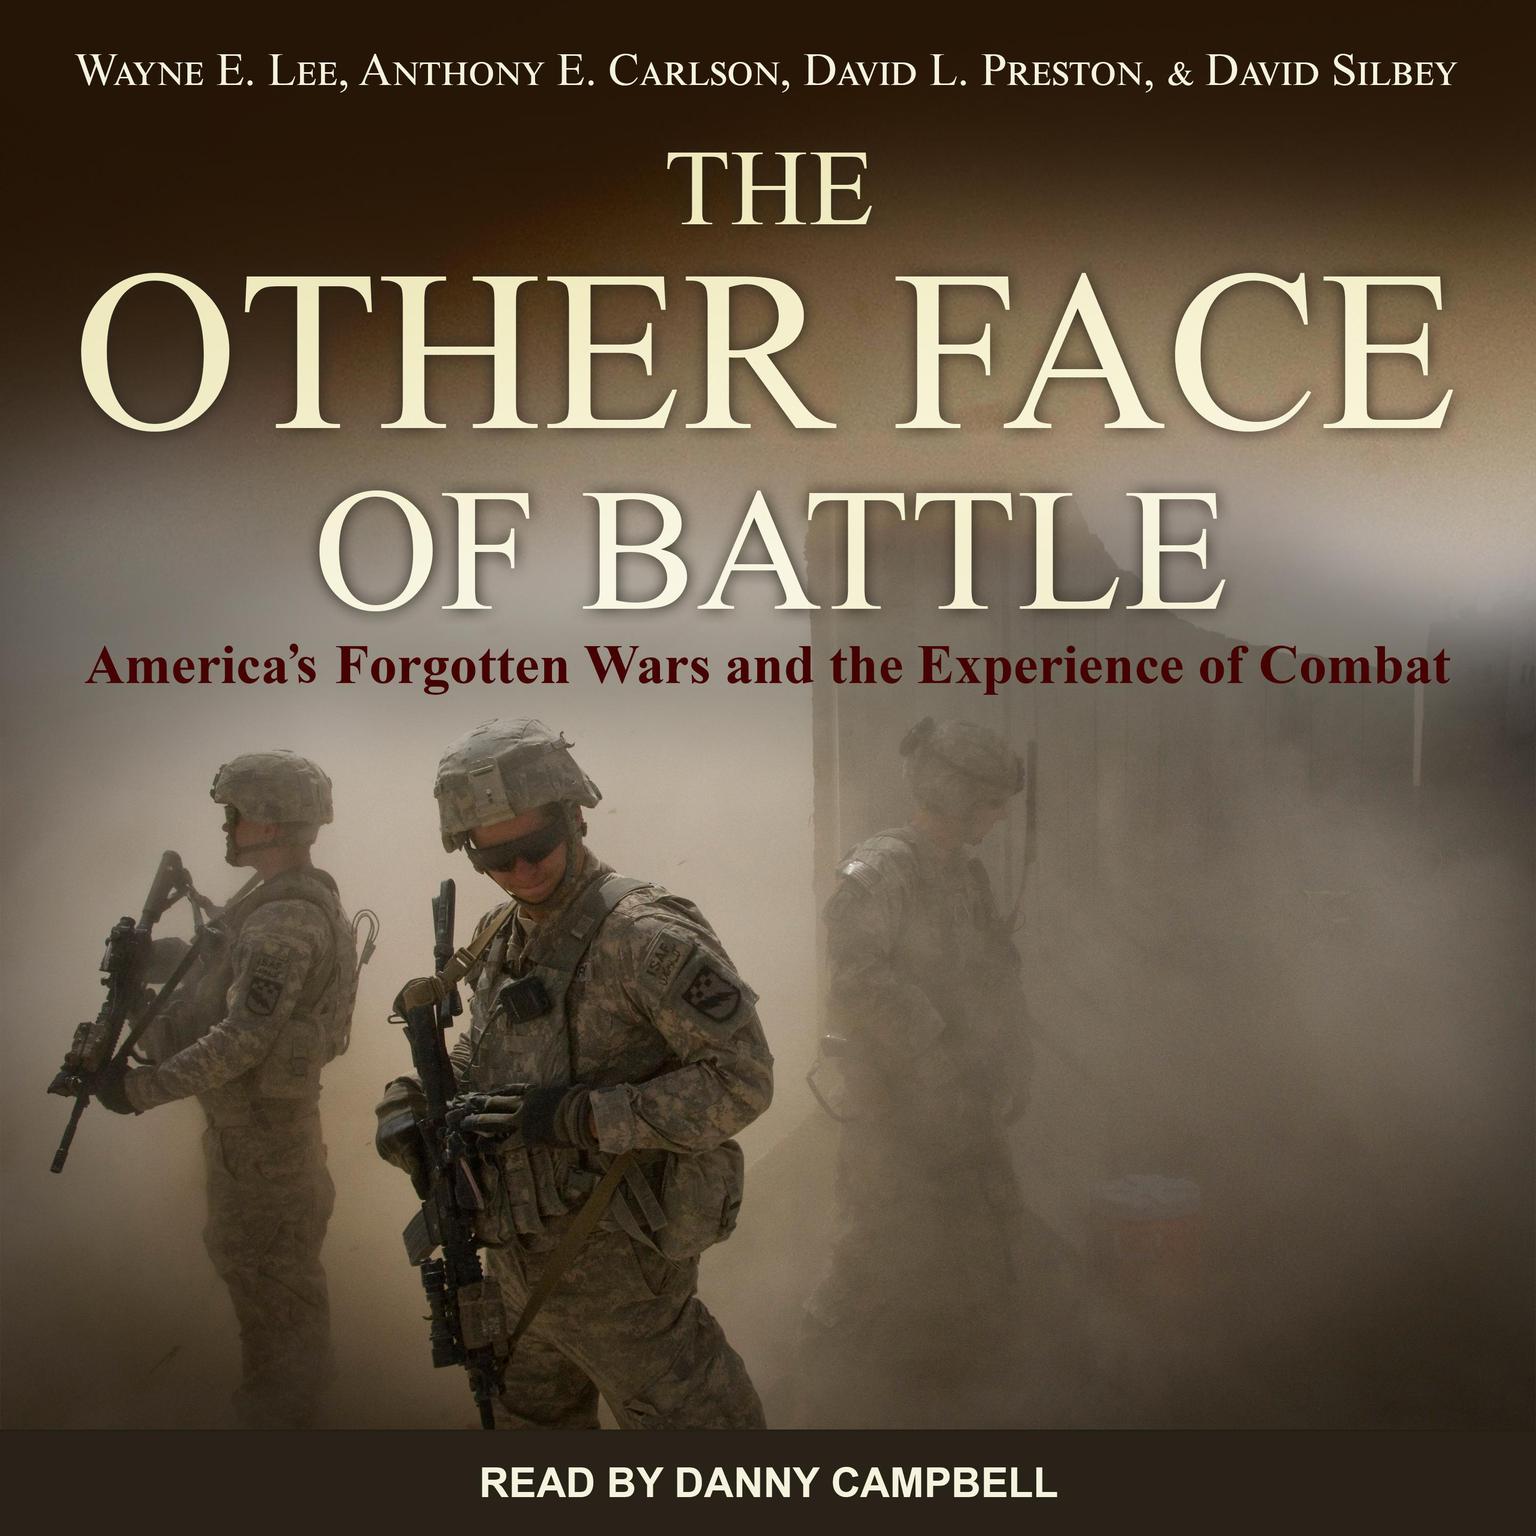 The Other Face of Battle: Americas Forgotten Wars and the Experience of Combat Audiobook, by Anthony E. Carlson